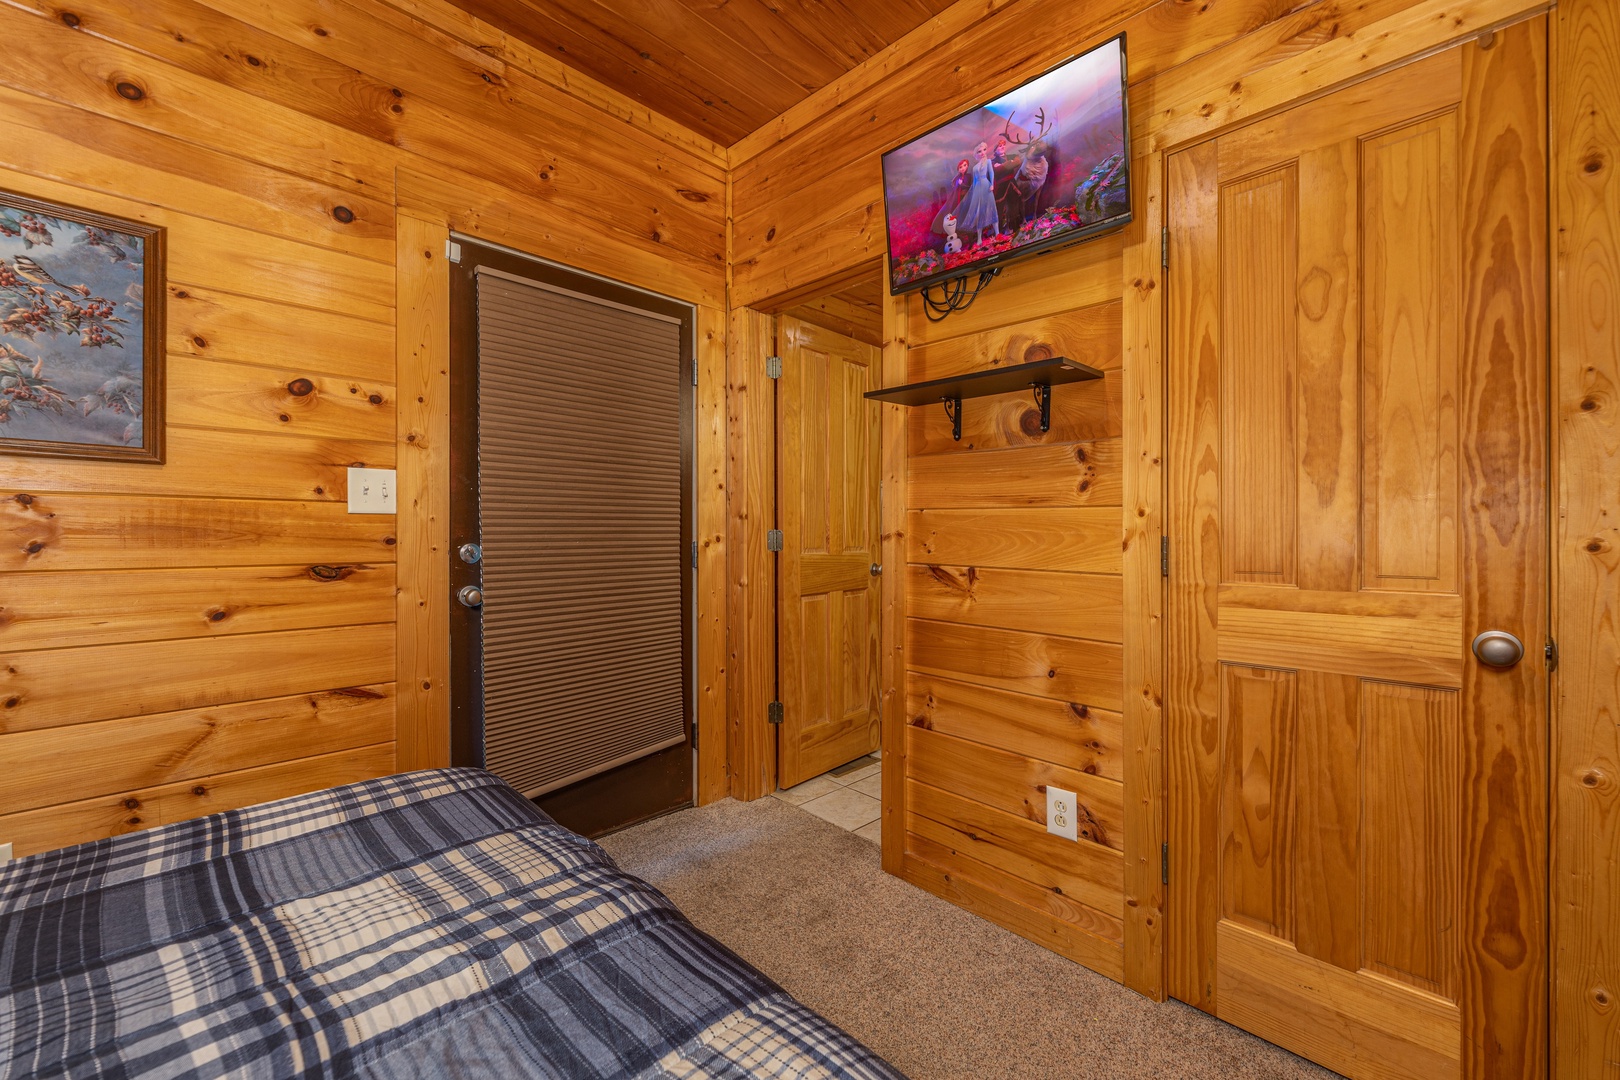 TV in a bedroom at Family Getaway, a 4 bedroom cabin rental located in Pigeon Forge